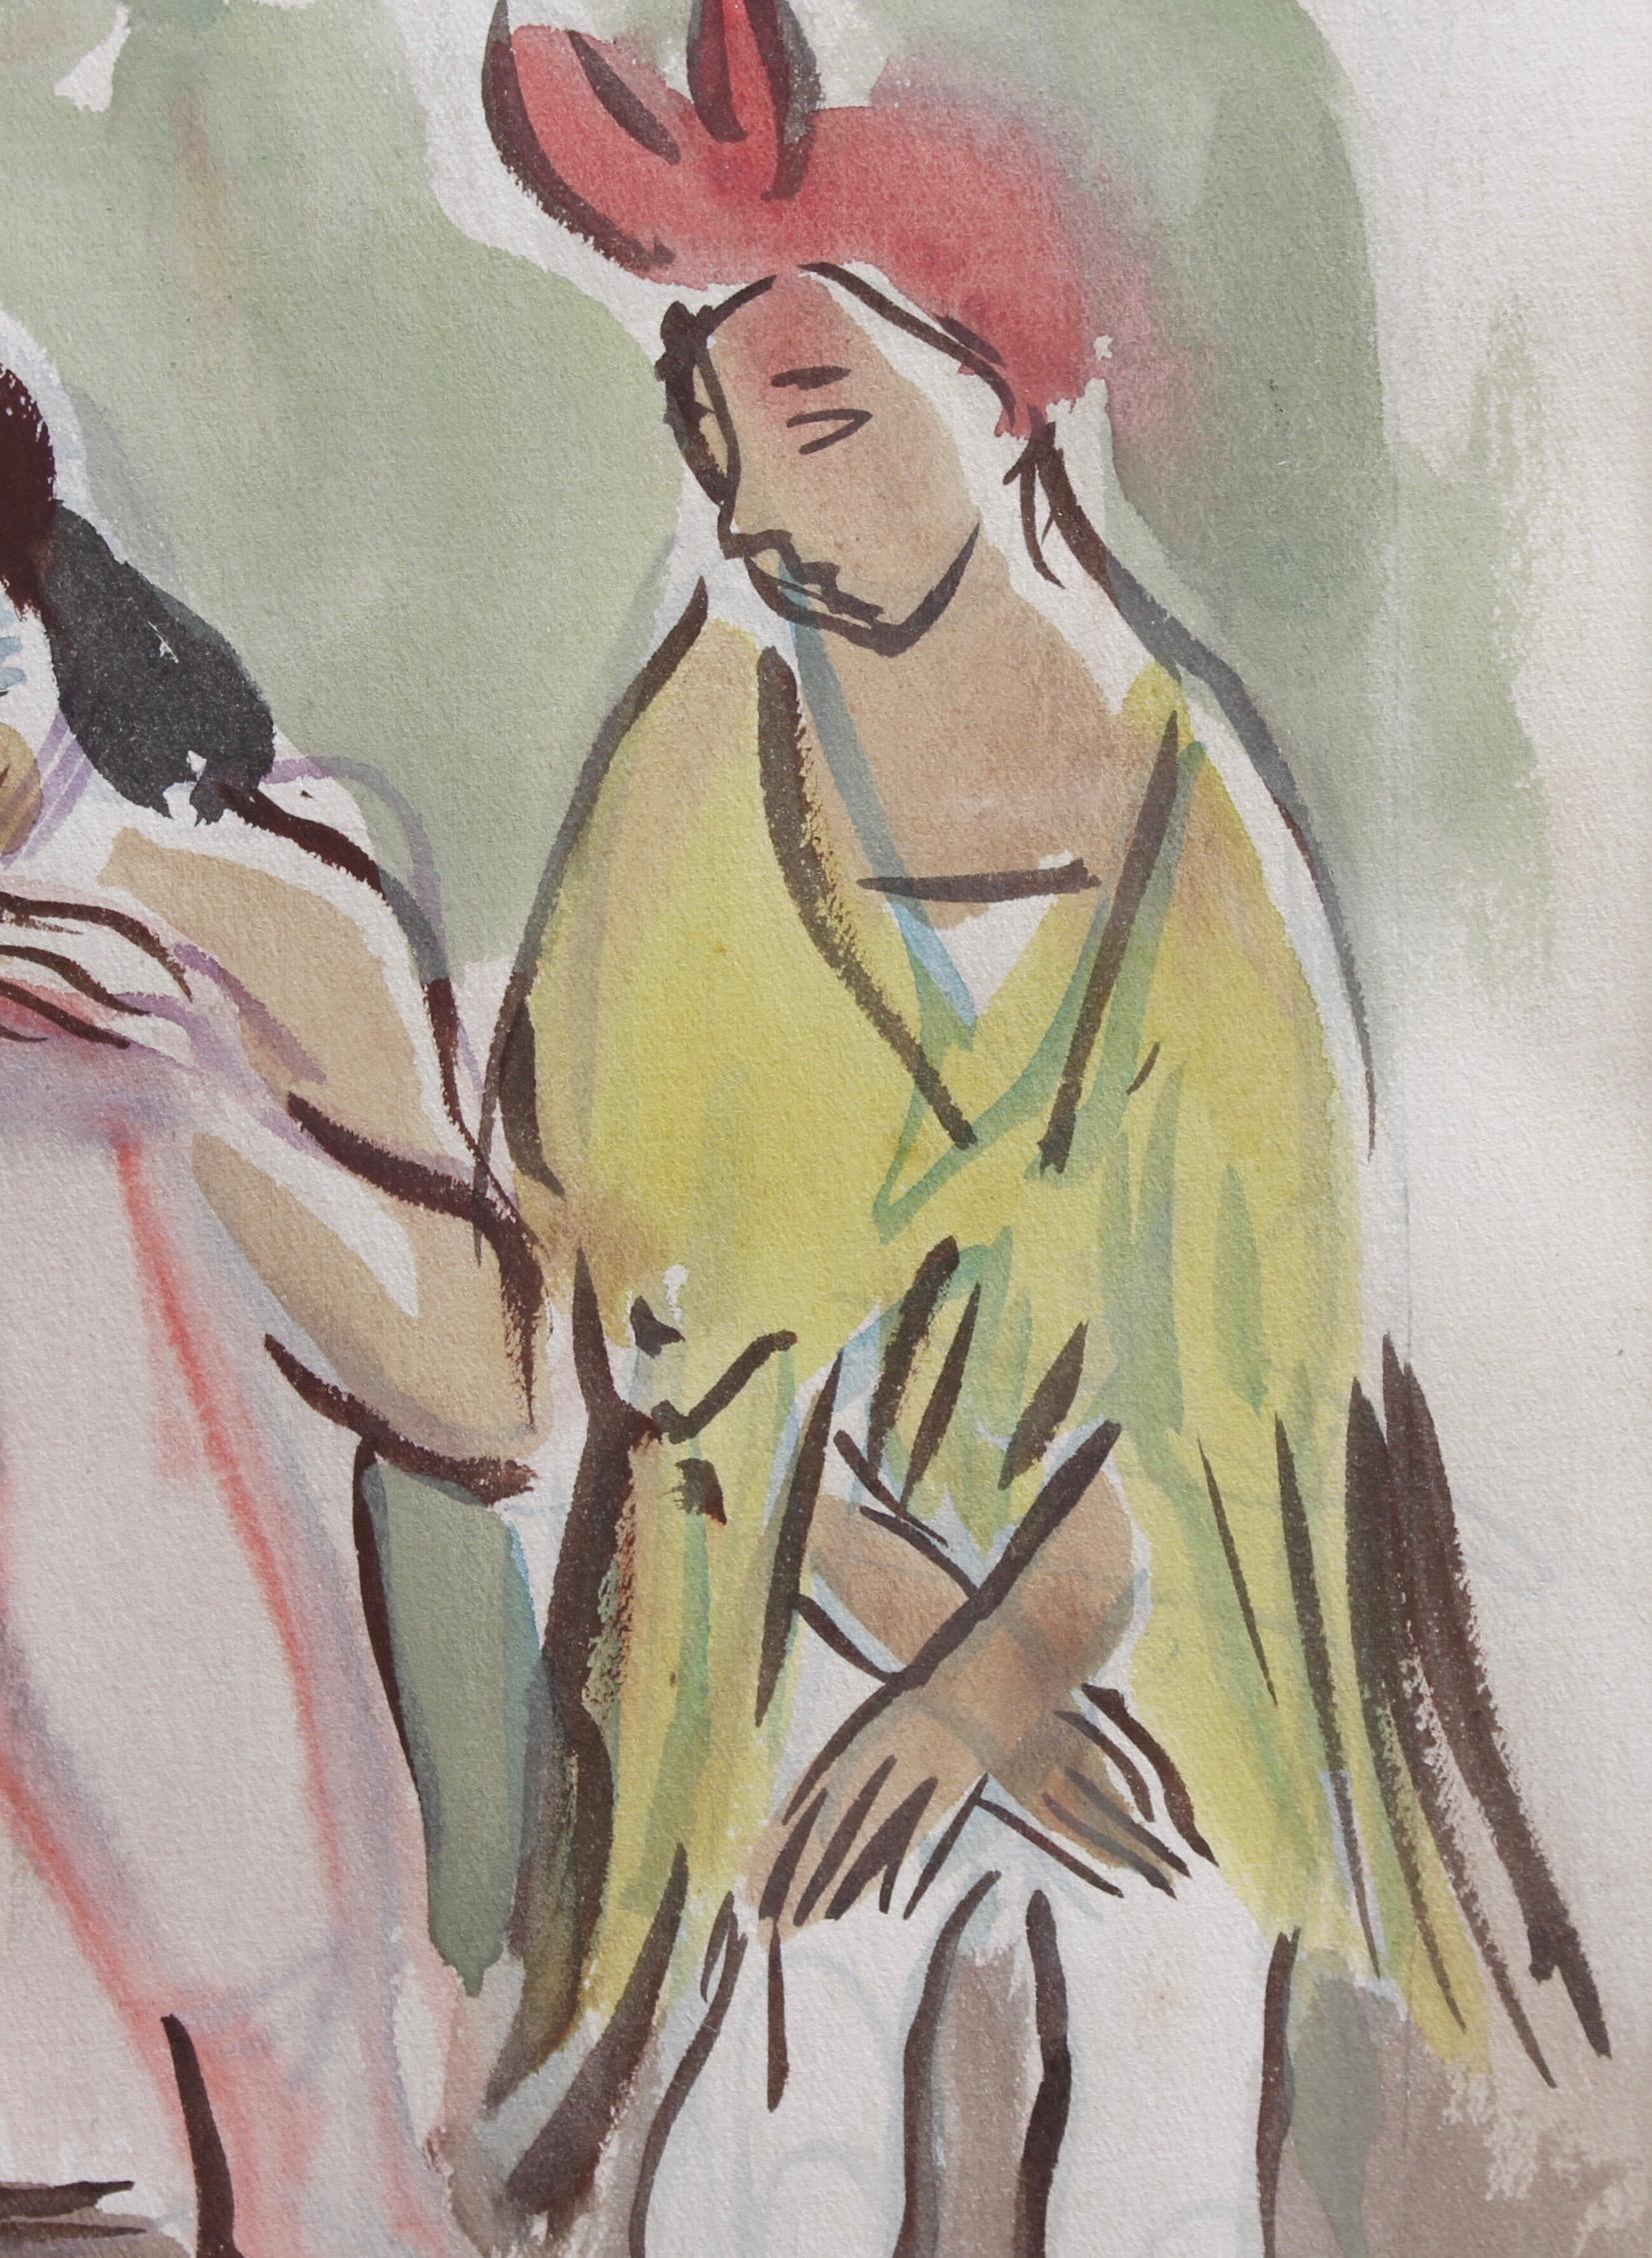 'Ballet Dancers at the Opera de Paris', watercolour on fine paper, by Yves Brayer (circa 1940s). While a costume and set-designer at the Opera in Paris in the 1940s, Brayer was fascinated by the dancers with whom he came into contact on a daily